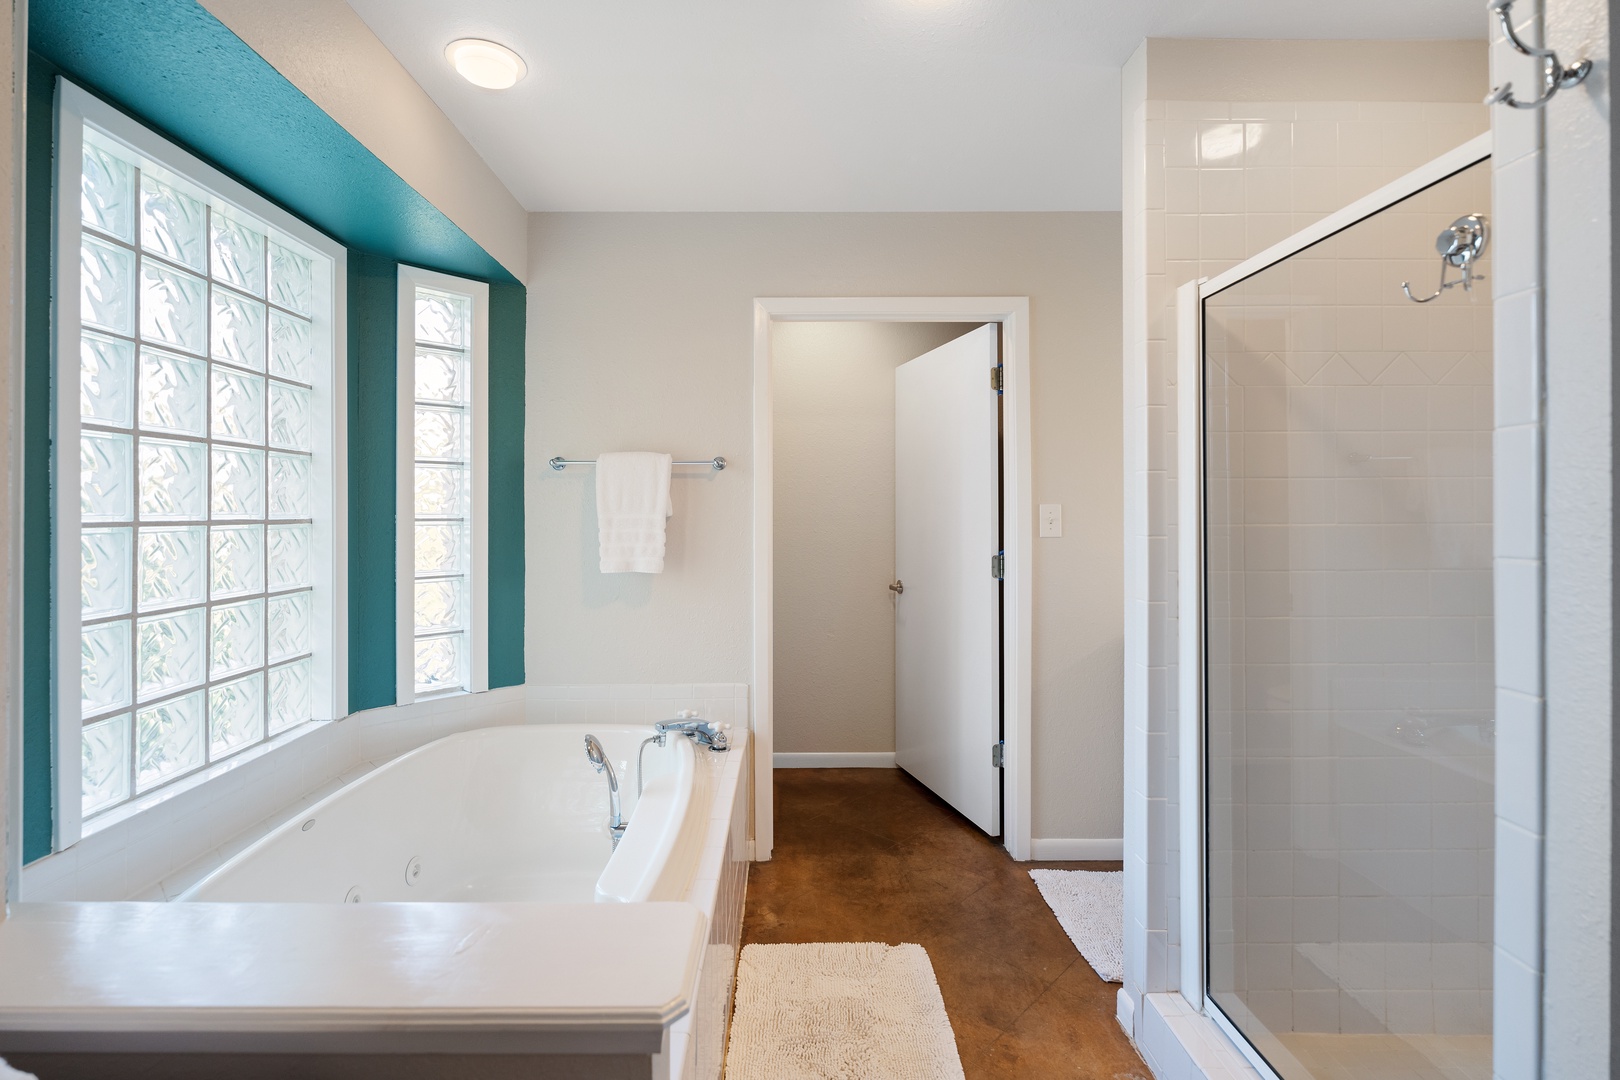 The king en suite boasts a jetted soaking tub and glass shower